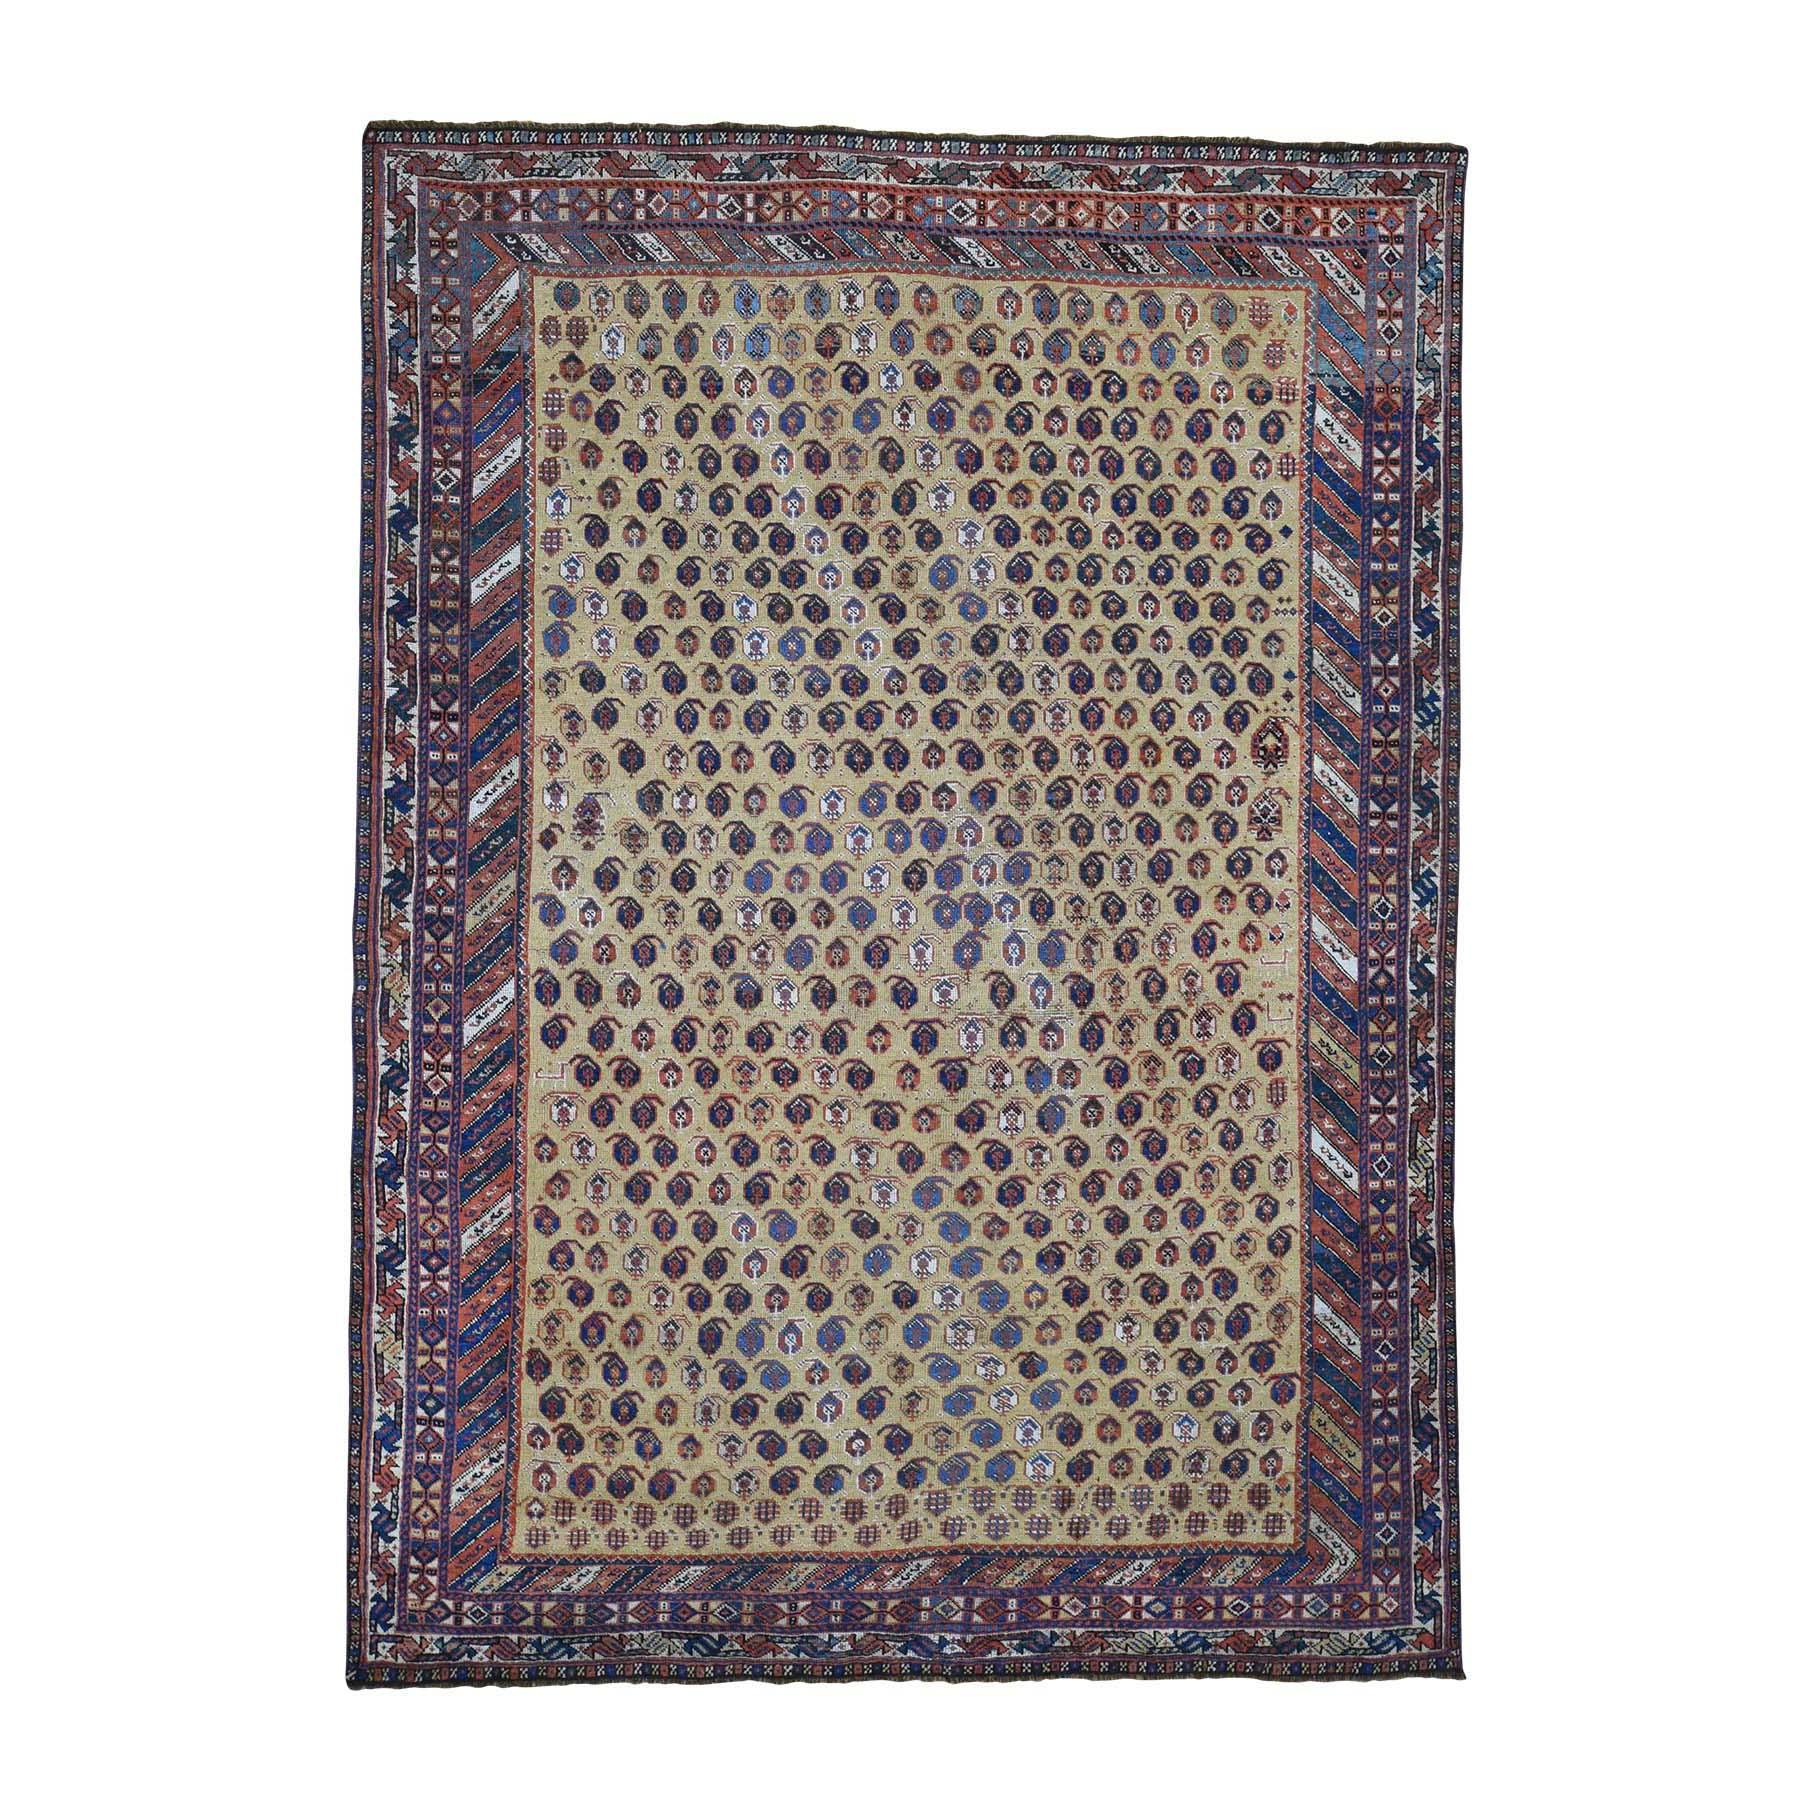 1900 Antique Persian Afshar Rug Yellow with Boteh Design